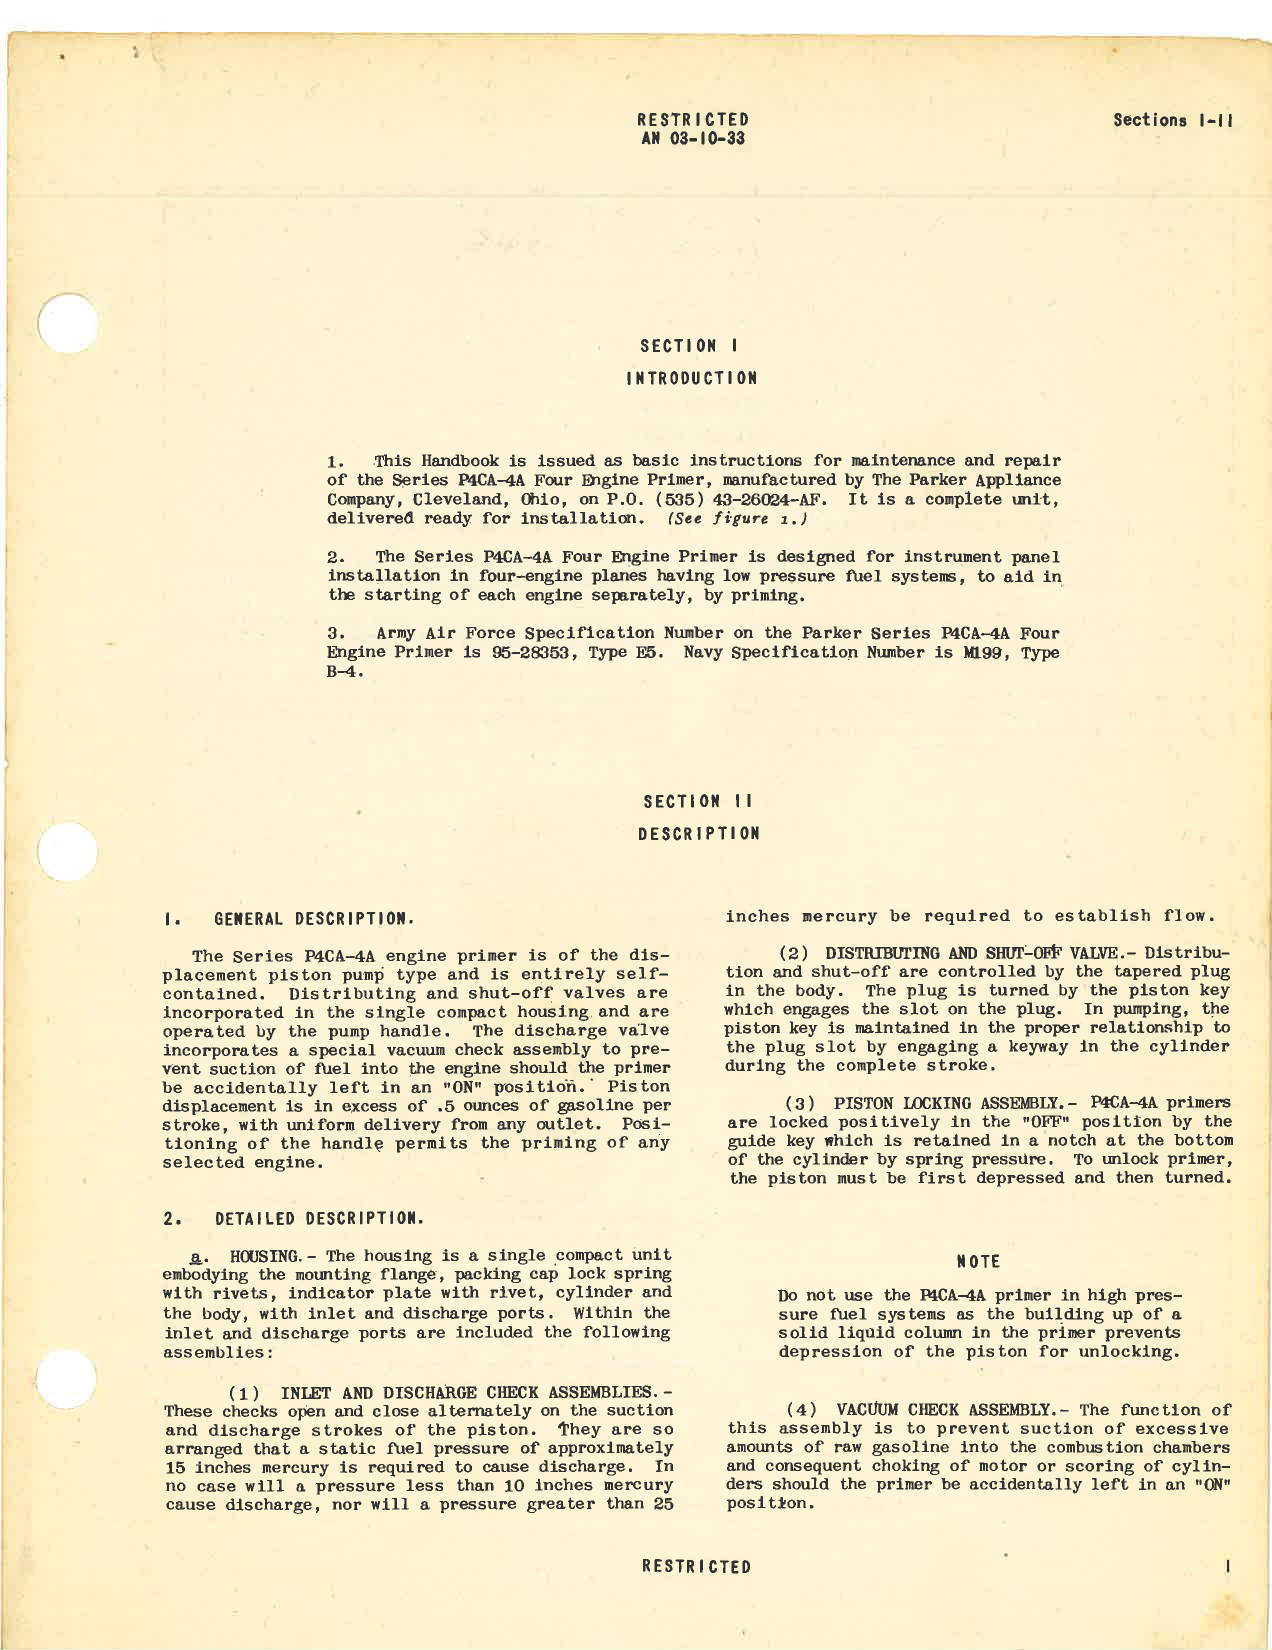 Sample page 5 from AirCorps Library document: Handbook of Instructions with Parts Catalog for Series P4CA-4A Four Engine Primer